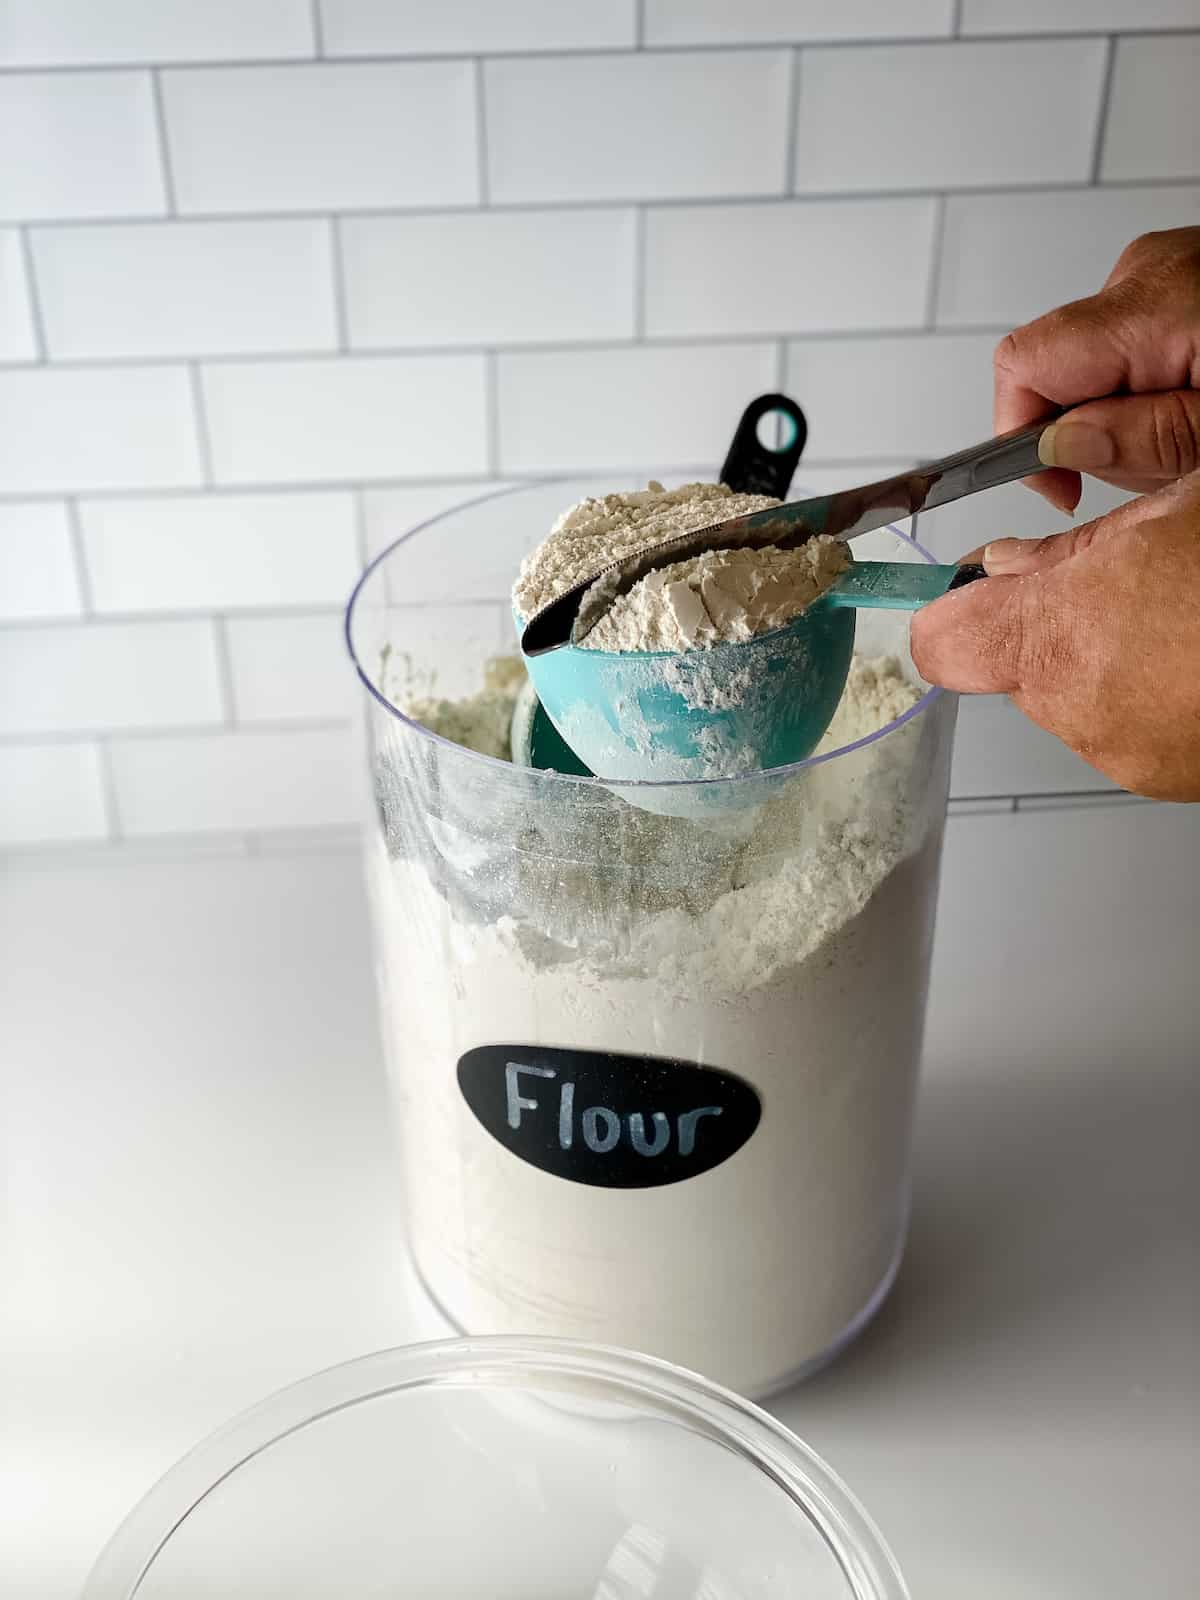 Container of flour and blue measuring cup being leveled.